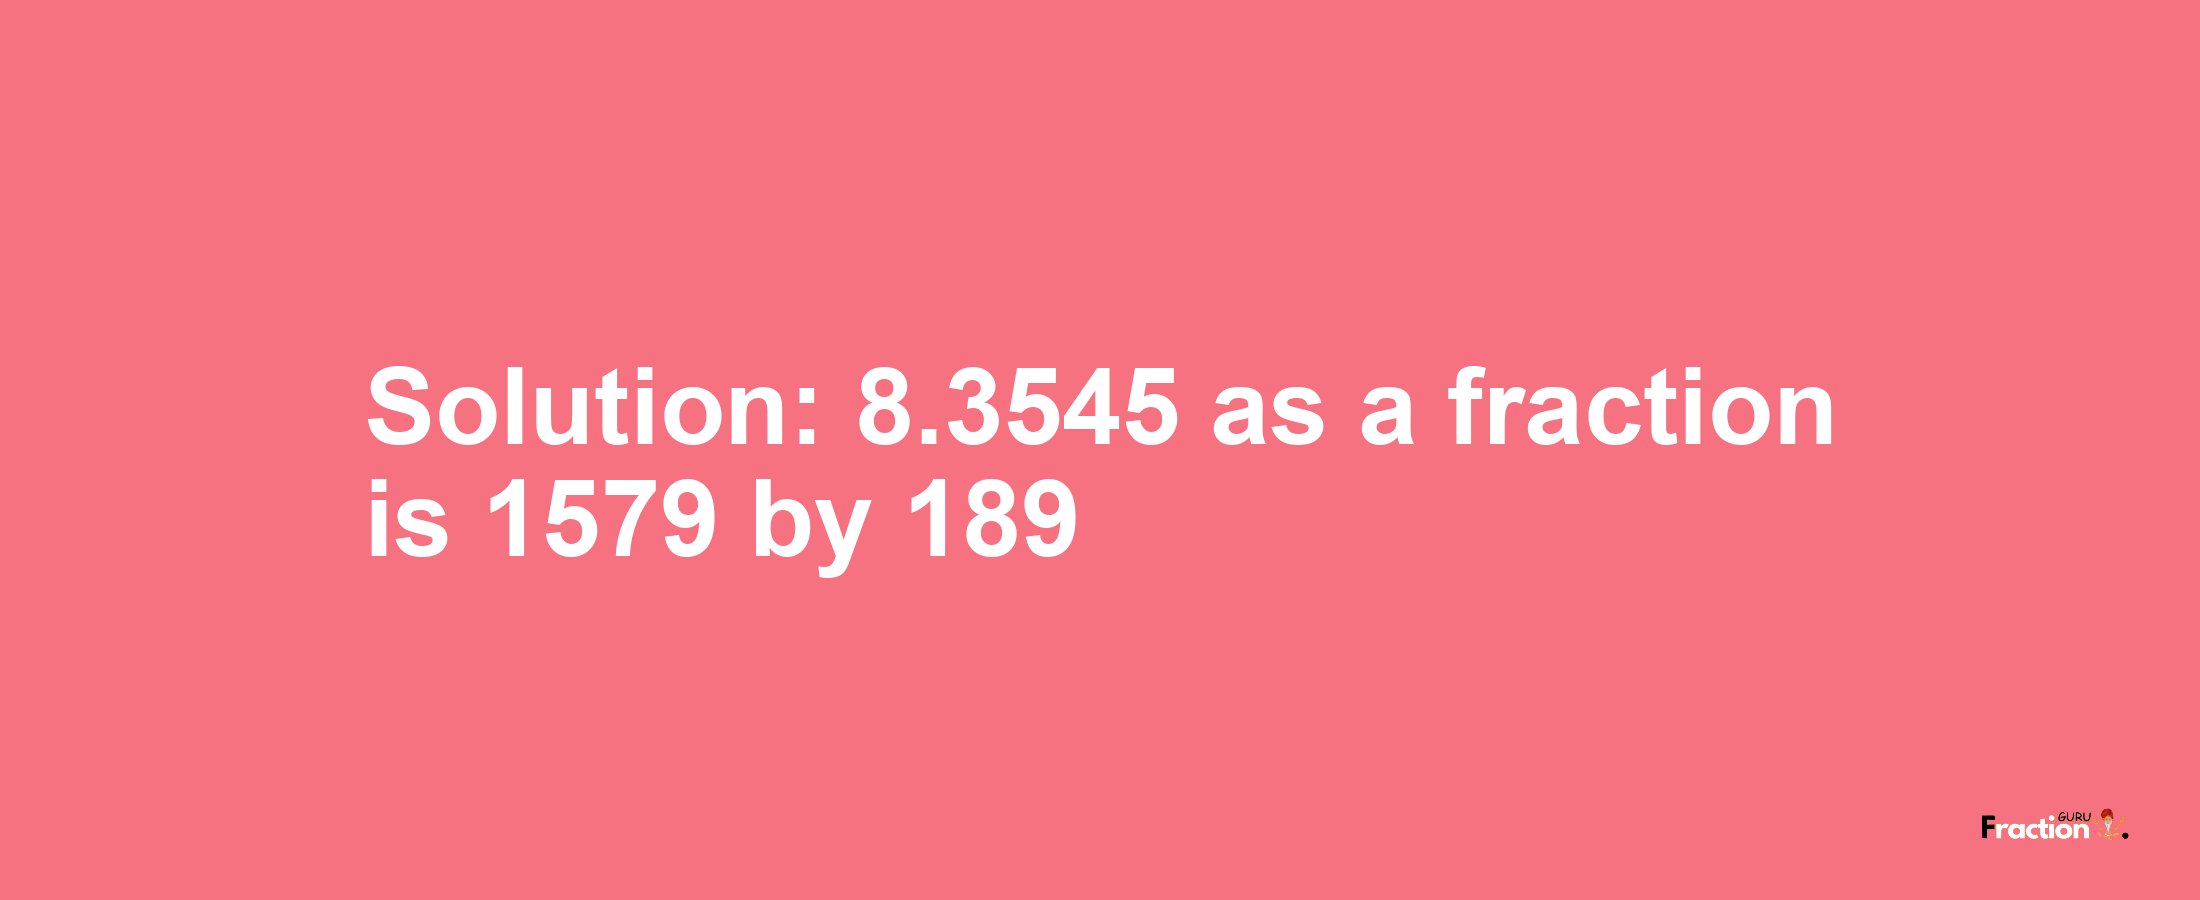 Solution:8.3545 as a fraction is 1579/189